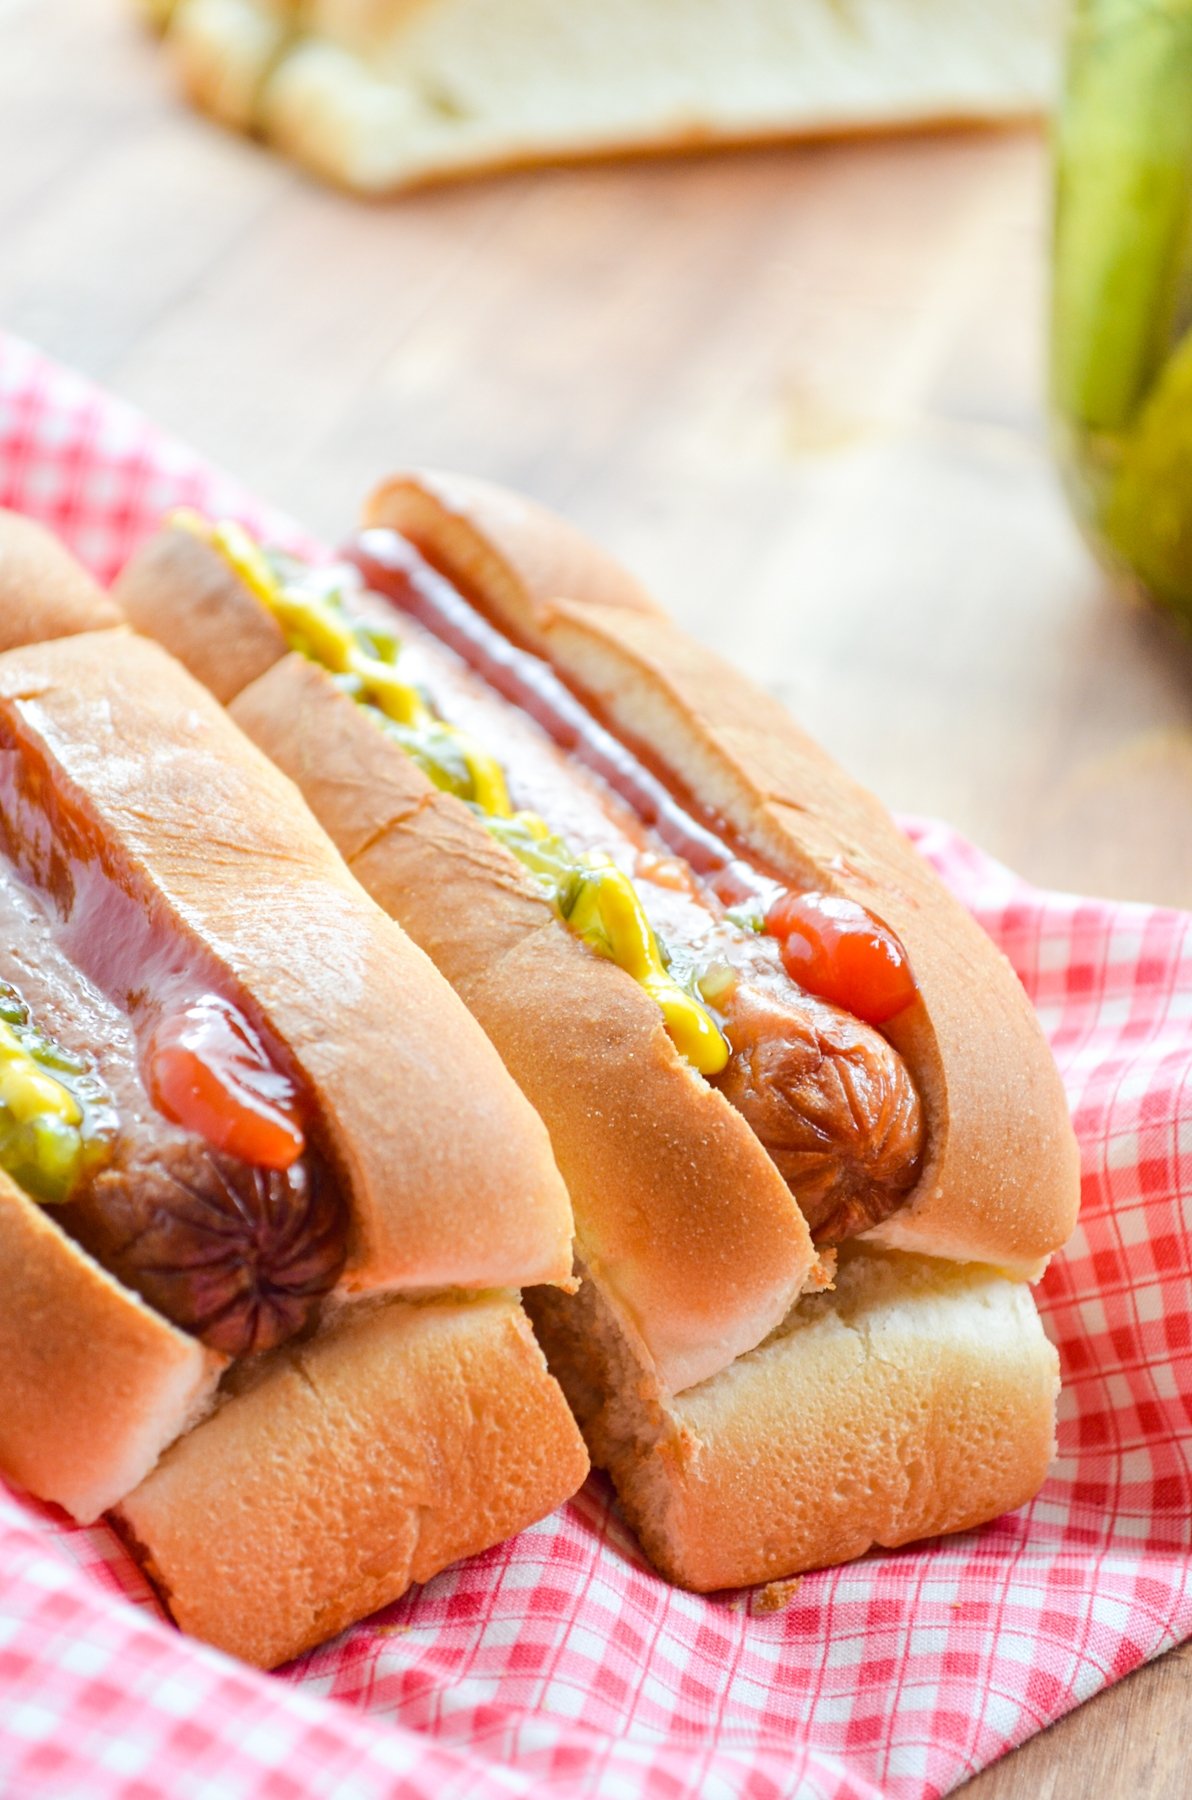 Two hot dogs, served in toasted buns and served with classic toppings.